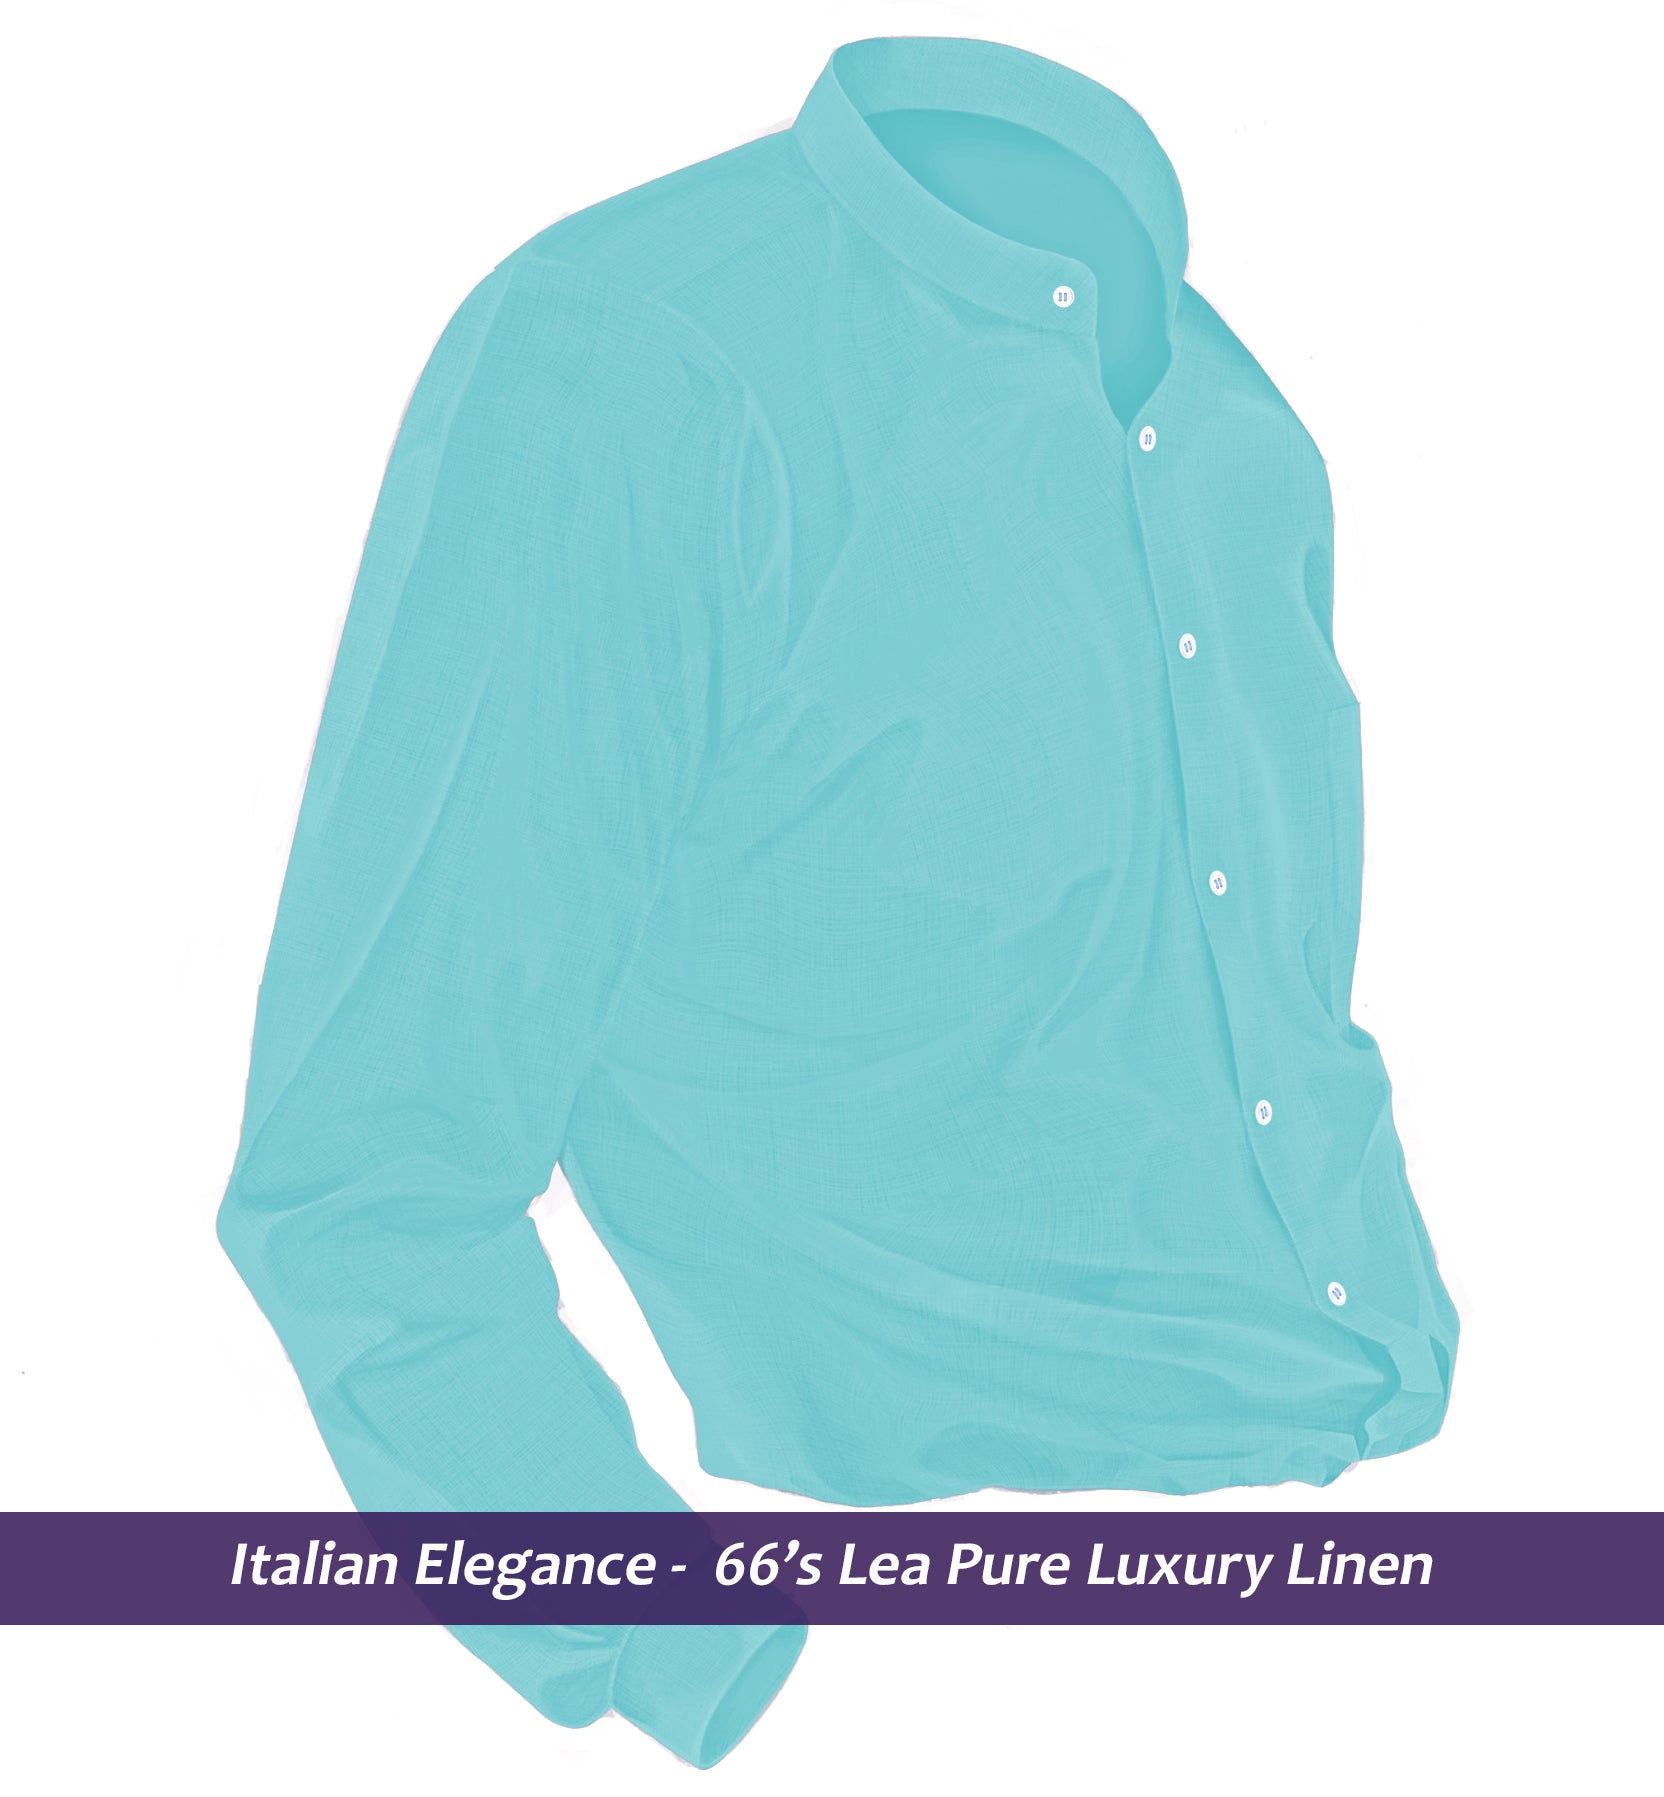 Munich- Turquoise Green Linen- Mandarin Collar- 66's Lea Pure Luxury Linen-Delivery from 29th April